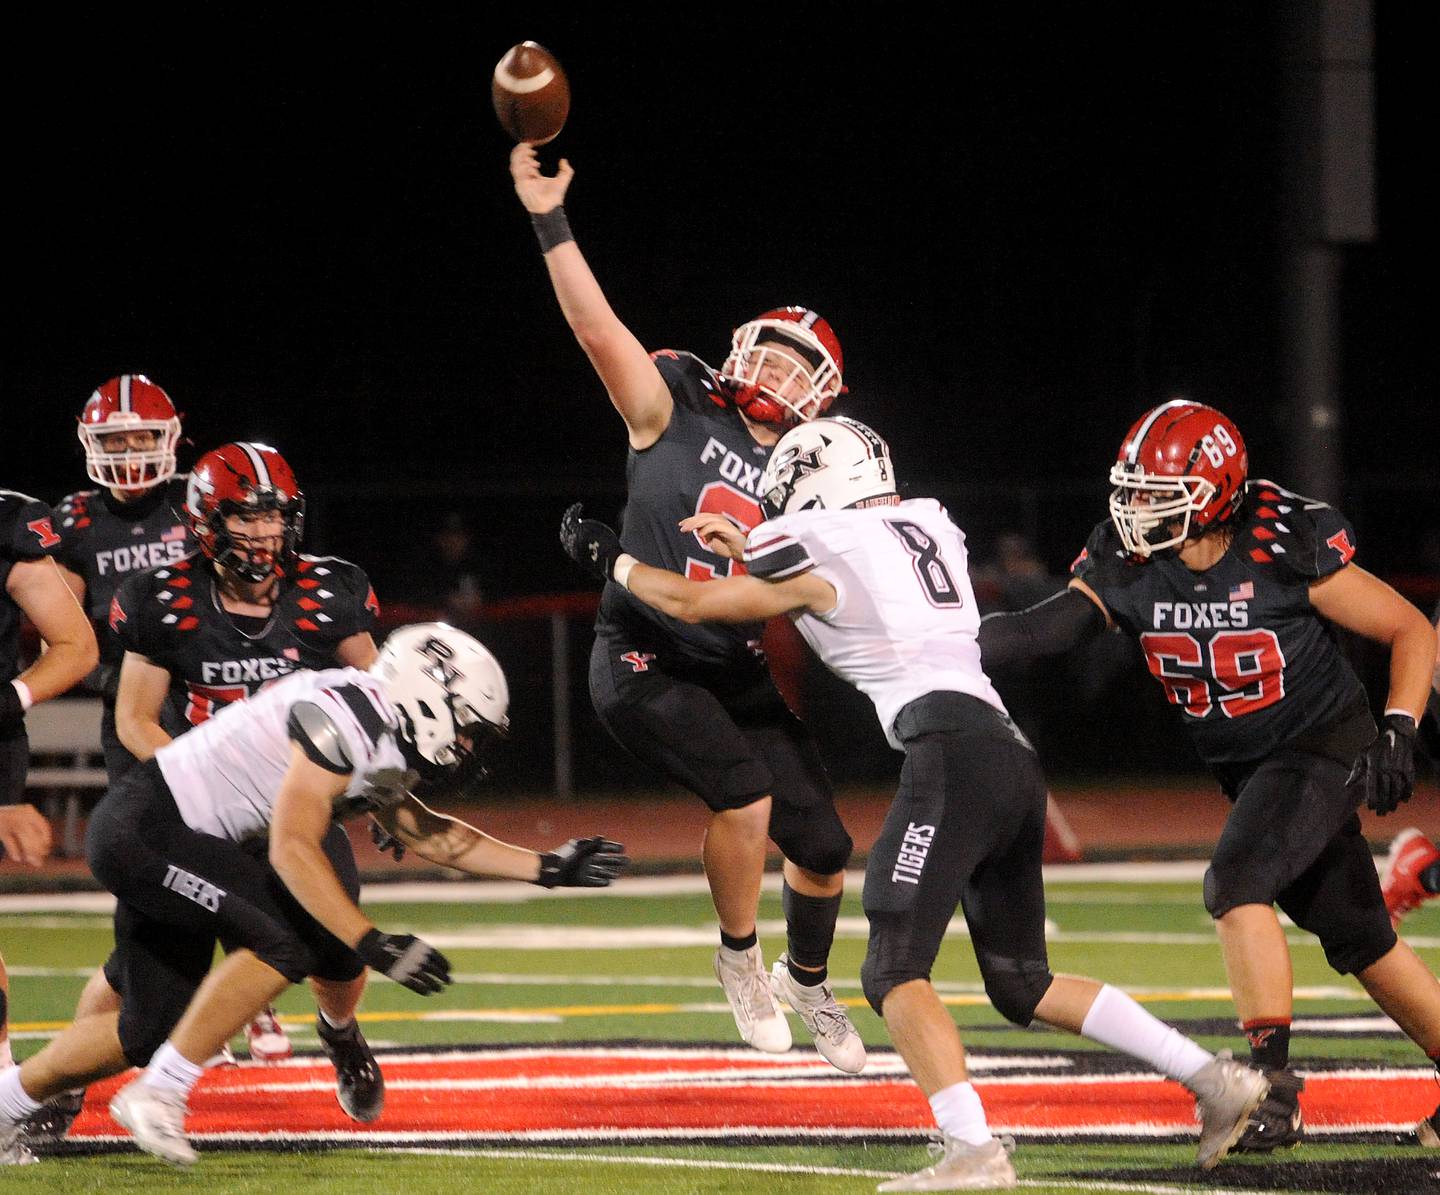 Yorkville quarterback Michael Dopart (9) takes a hit from Plainfield North defender Ryan Pass during a varsity football game at Yorkville High School on Friday, Oct. 20, 2023.